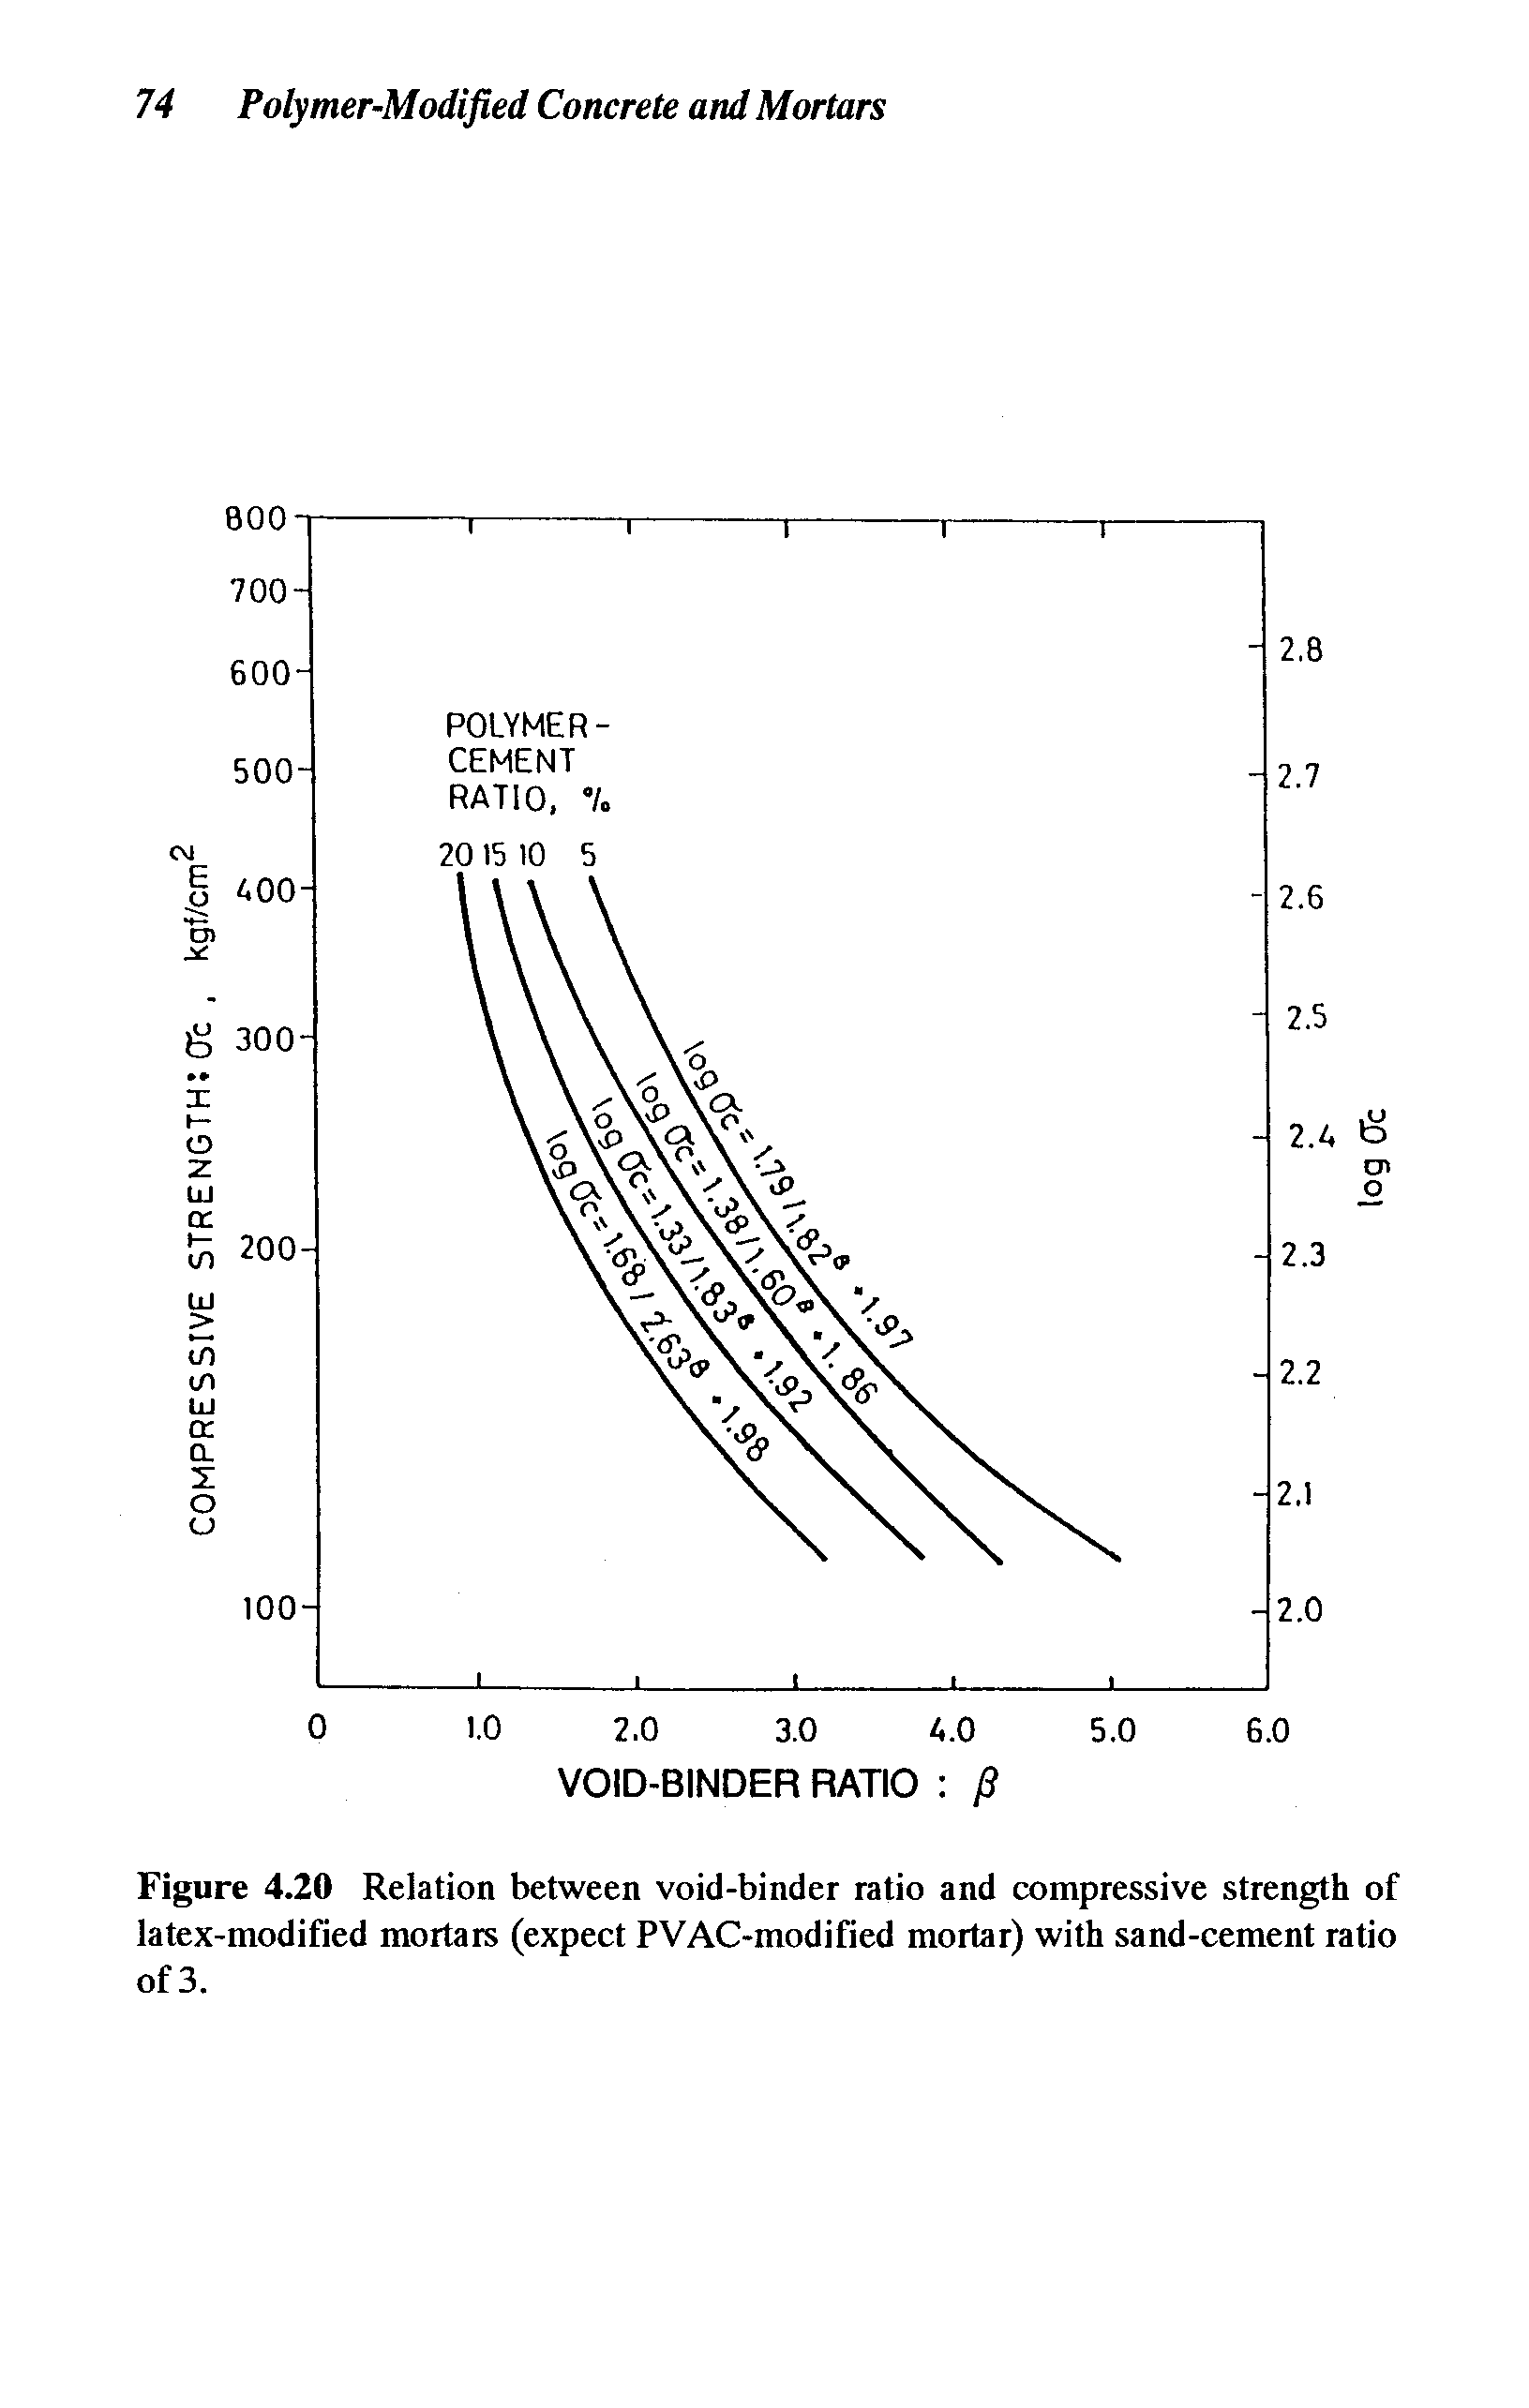 Figure 4.20 Relation between void-binder ratio and compressive strength of latex-modified mortars (expect PVAC-modified mortar) with sand-cement ratio of 3.